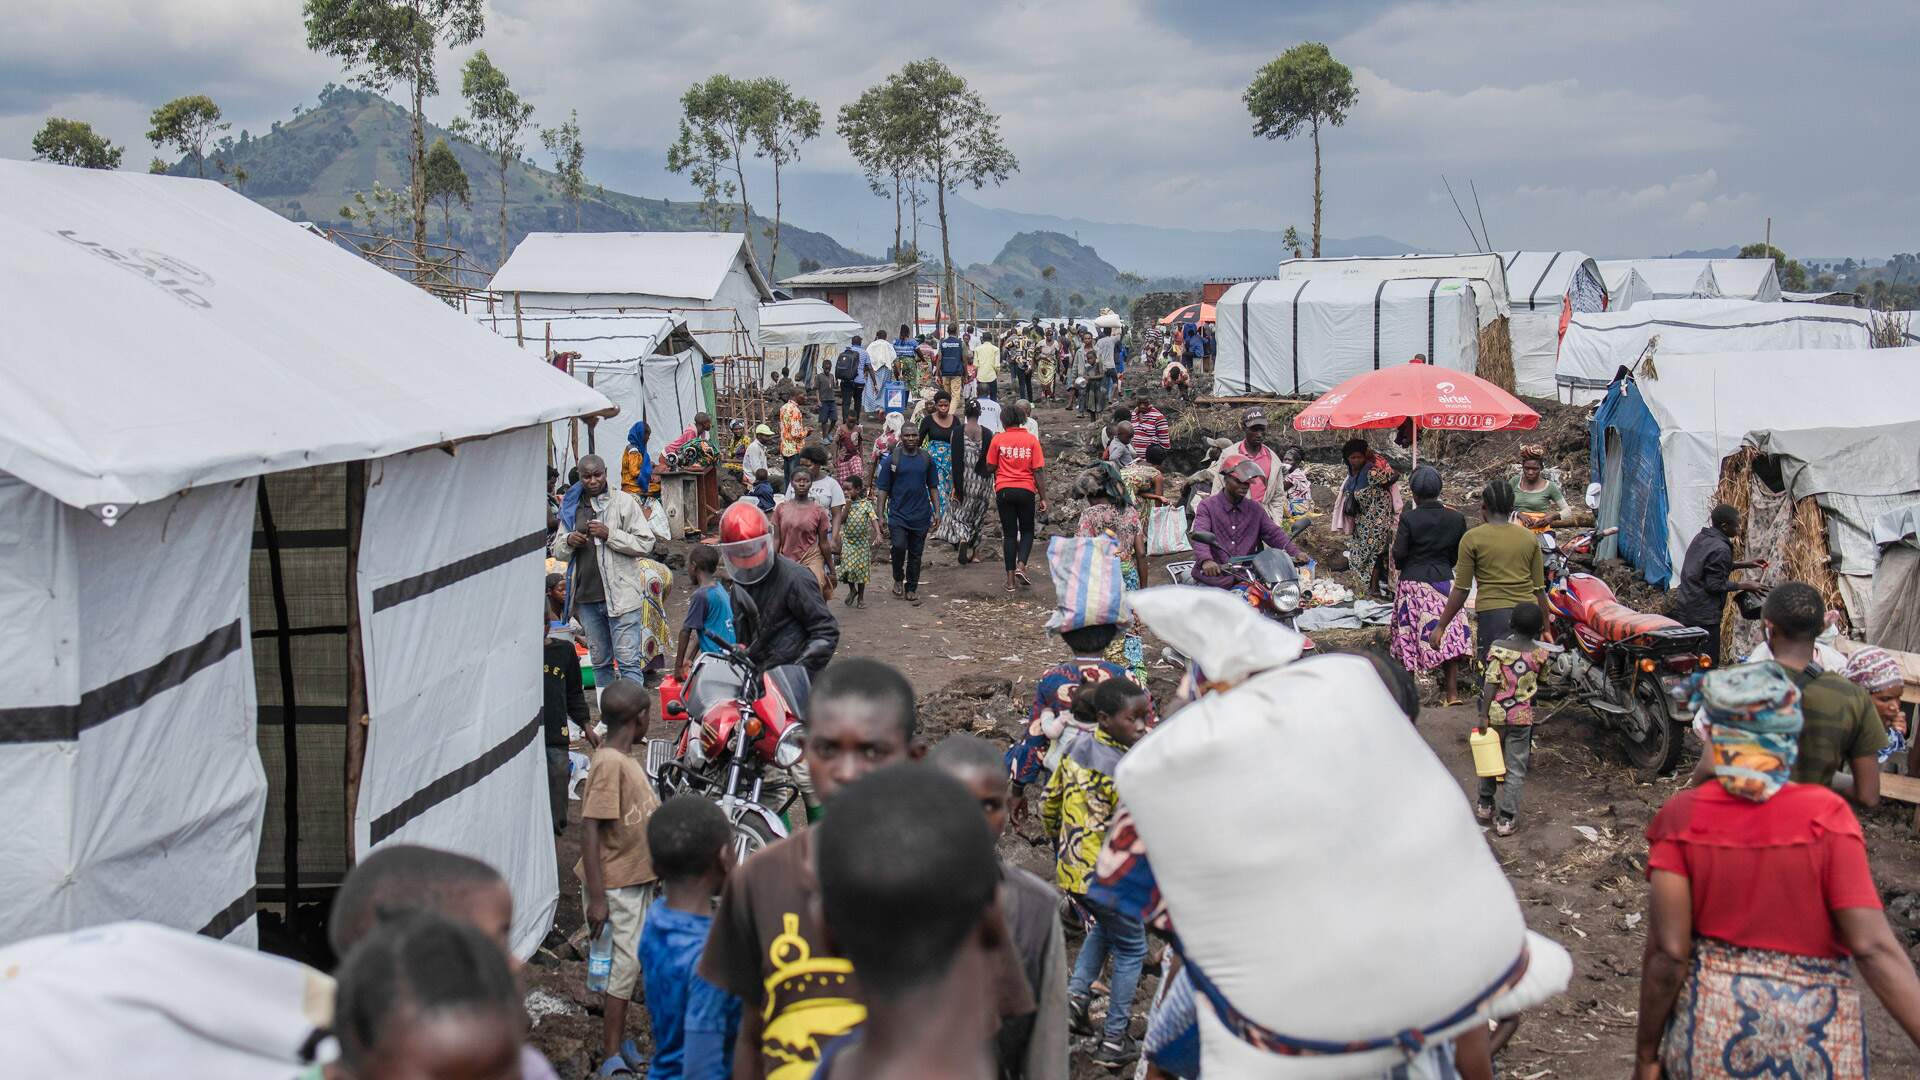 People who have fled their homes due to conflict find themselves in crowded camps for internally displaced people, with poor access to hygiene and sanitation. These conditions are ripe for cholera to thrive. Photo from March 2023 of the Bulengo camp in North Kivu. Credit: WHO / Guerchom Ndebo